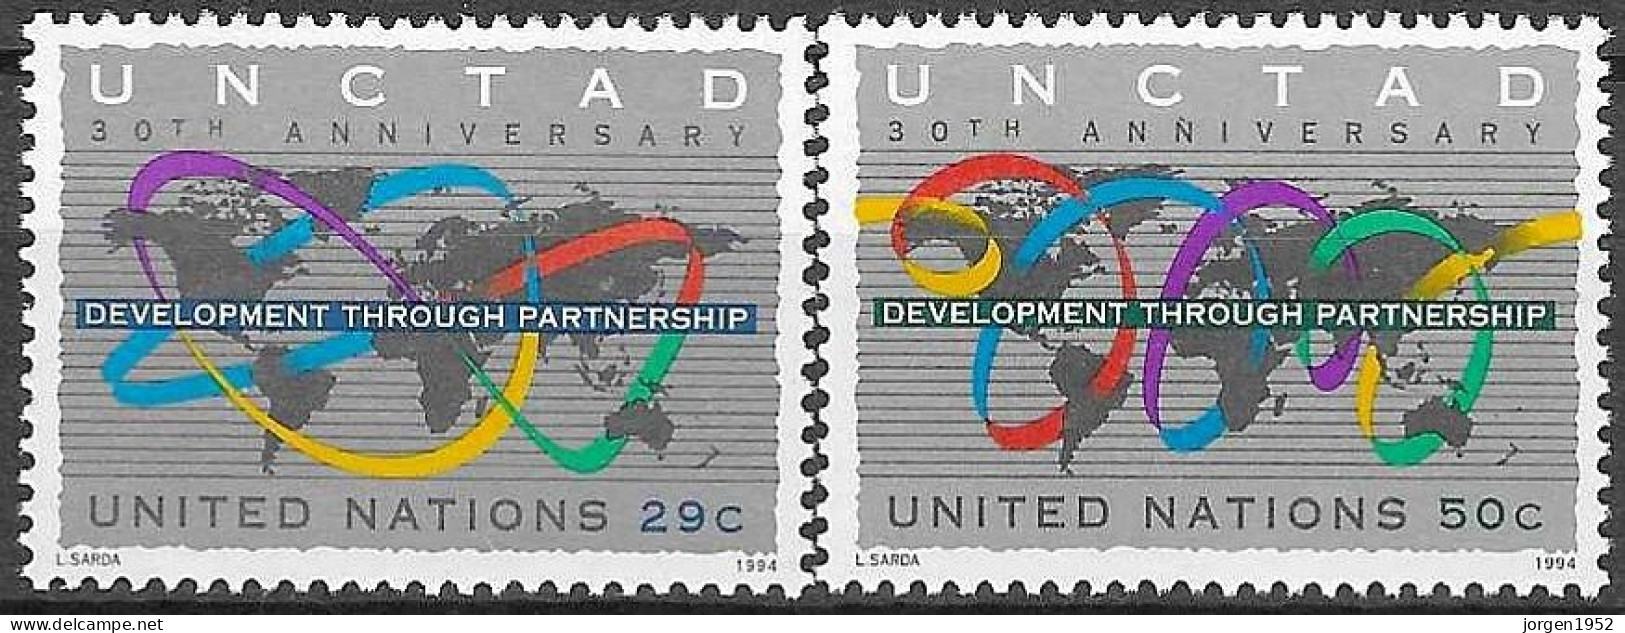 UNITED NATIONS # NEW YORK FROM 1994 STAMPWORLD 677-78** - Unused Stamps